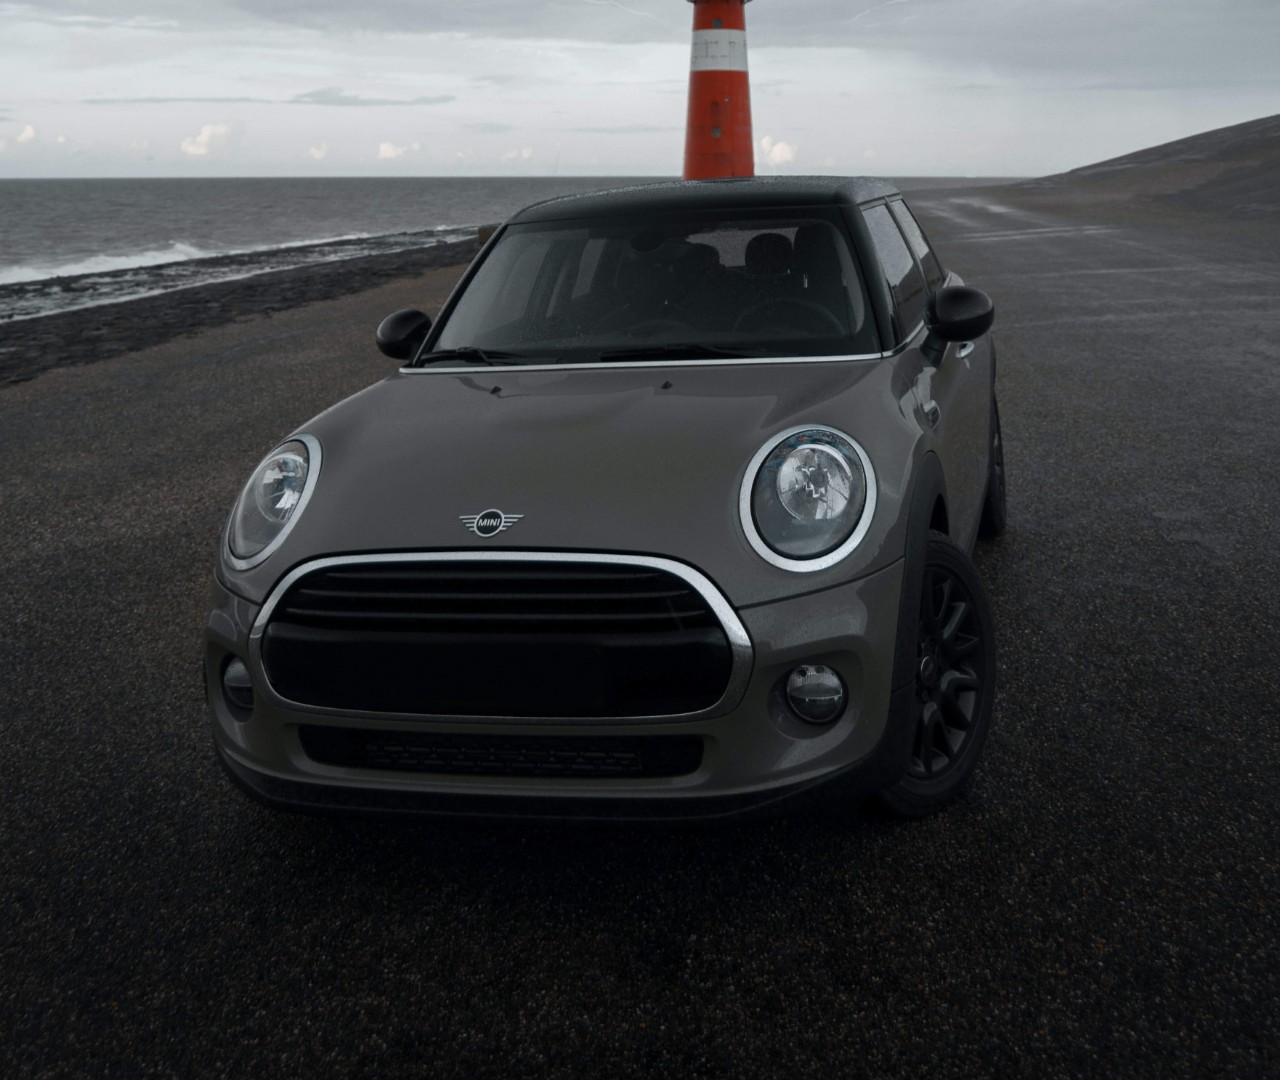 Mini Cooper working with Goodyear Tyres